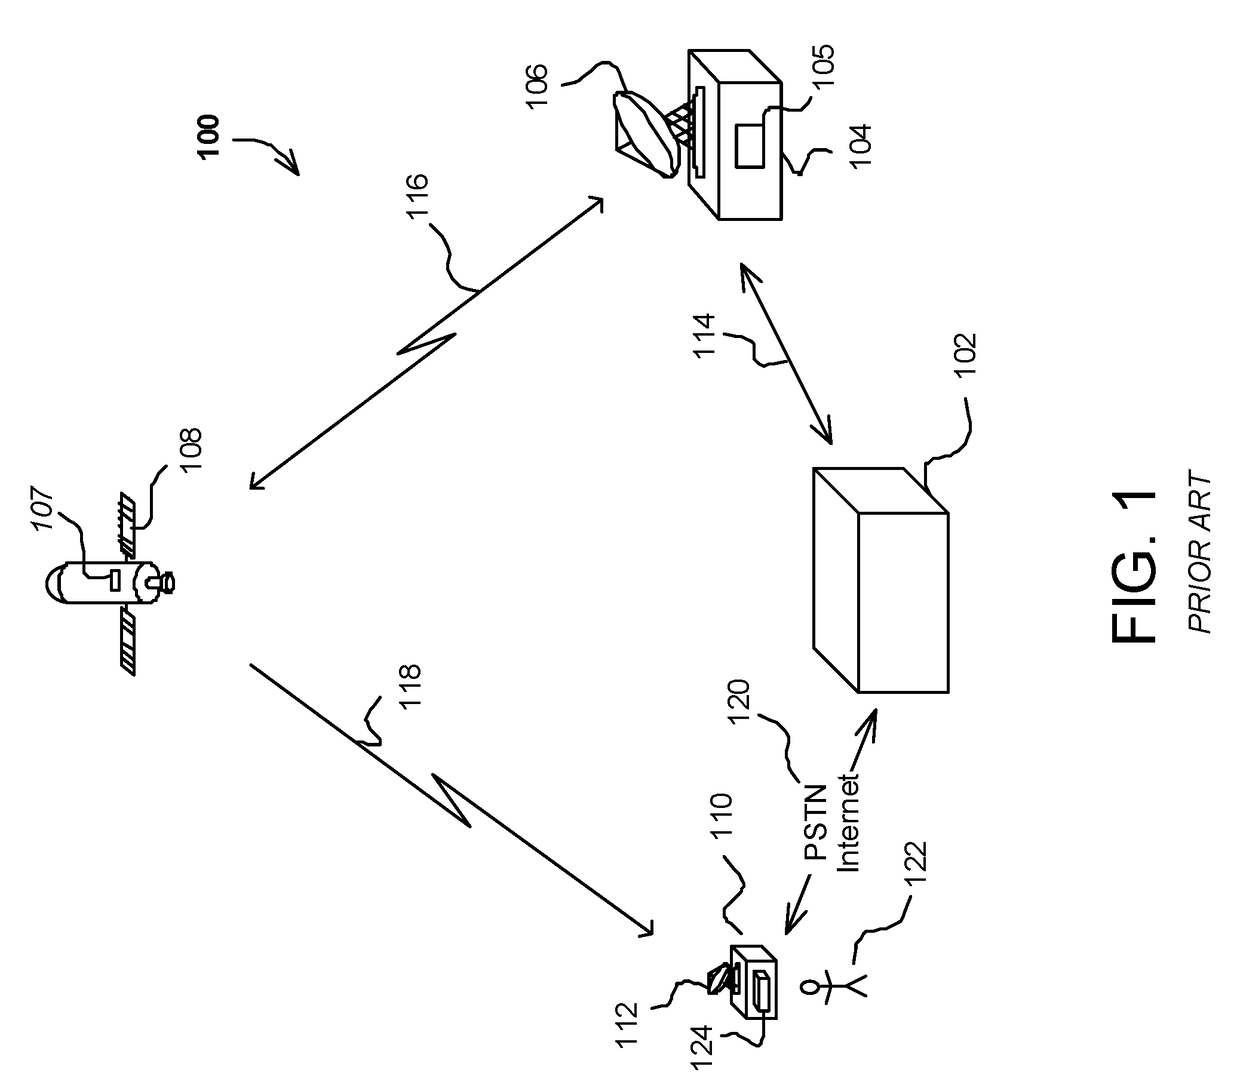 Outdoor unit configured for customer installation and method of aligning same